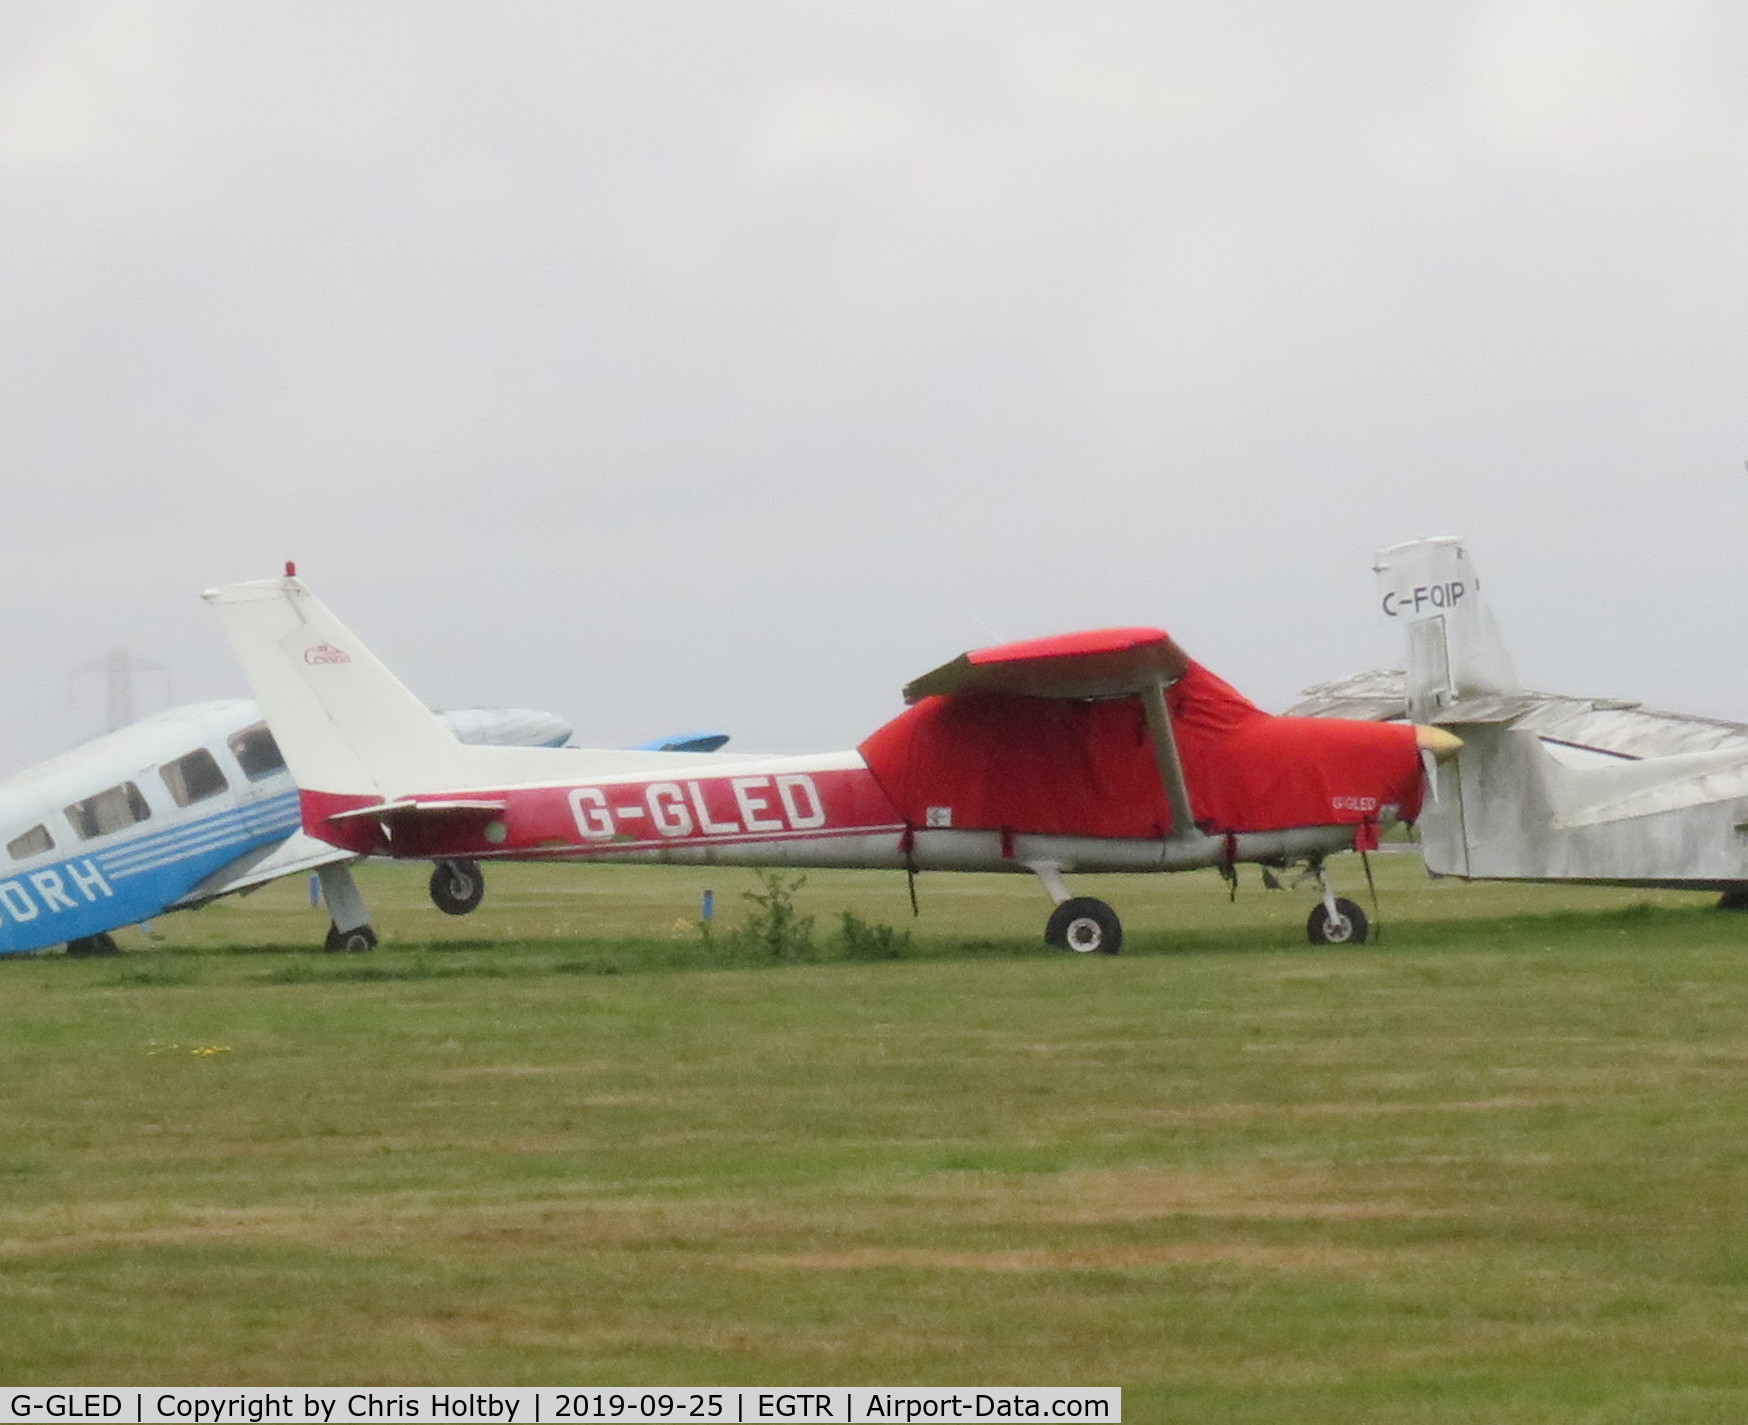 G-GLED, 1975 Cessna 150M C/N 150-76673, Recent addition to the Elstree graveyard EASA Certificate expired in May 2019.